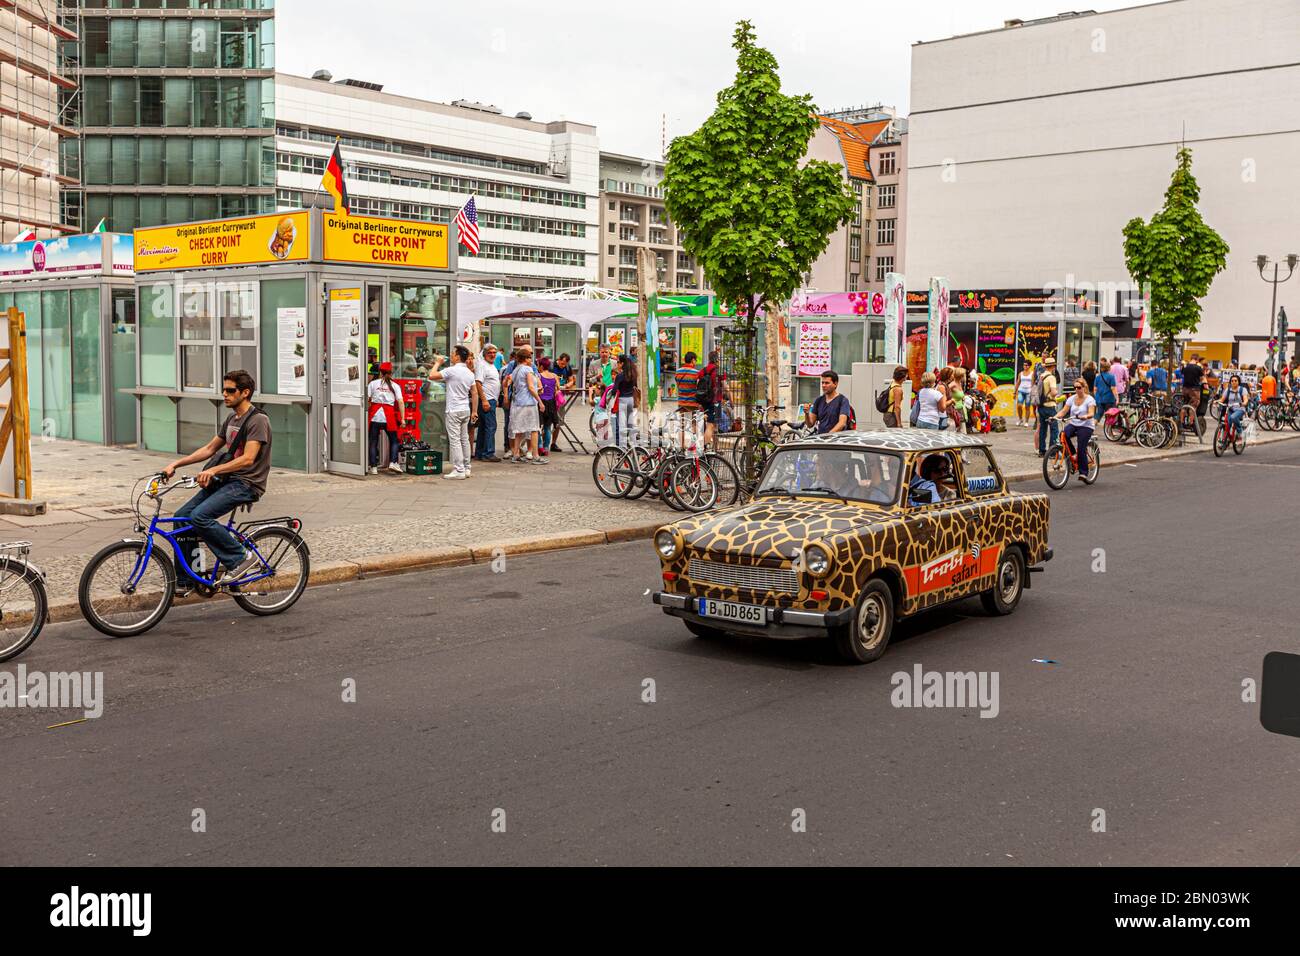 The classic car Trabant of East Germany (GDR) in Berlin, Germany Stock Photo